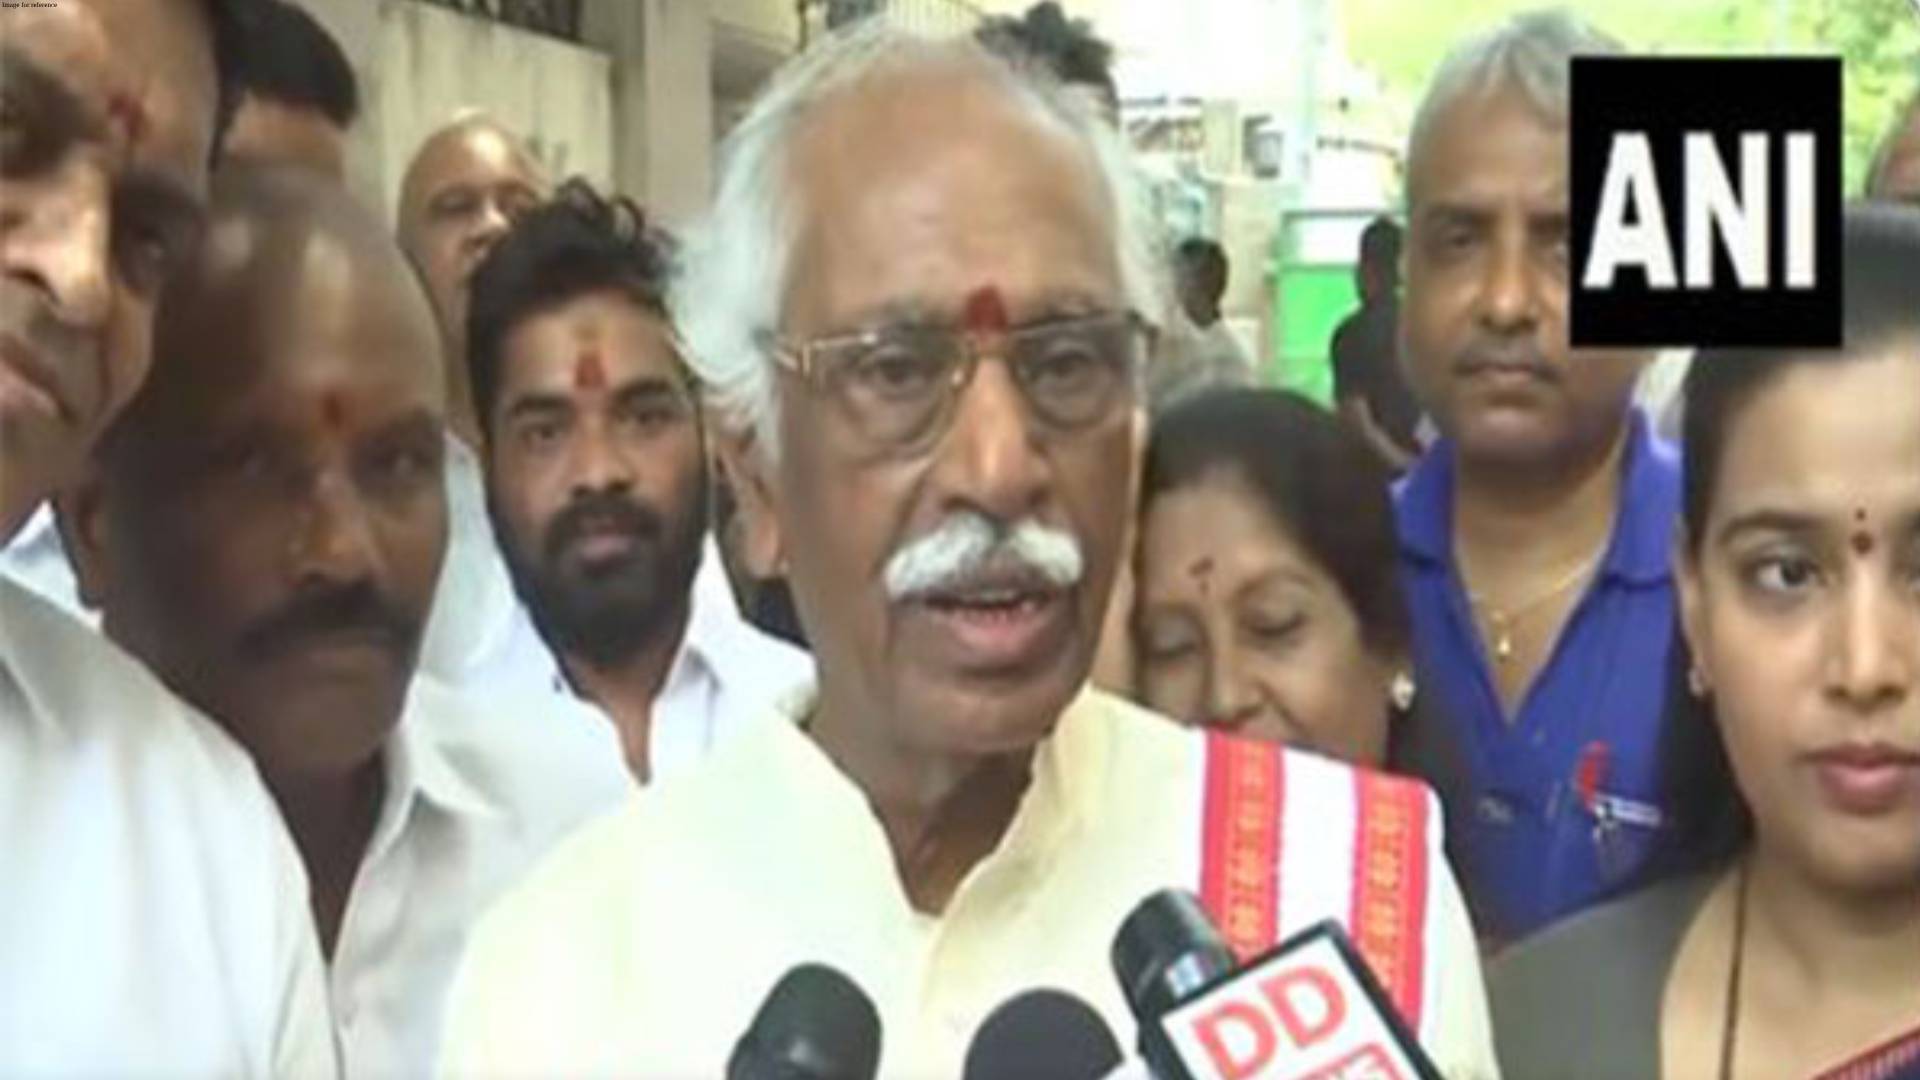 Haryana Governor Bandaru Dattatraya casts vote in Hyderabad, urges people to vote in large numbers